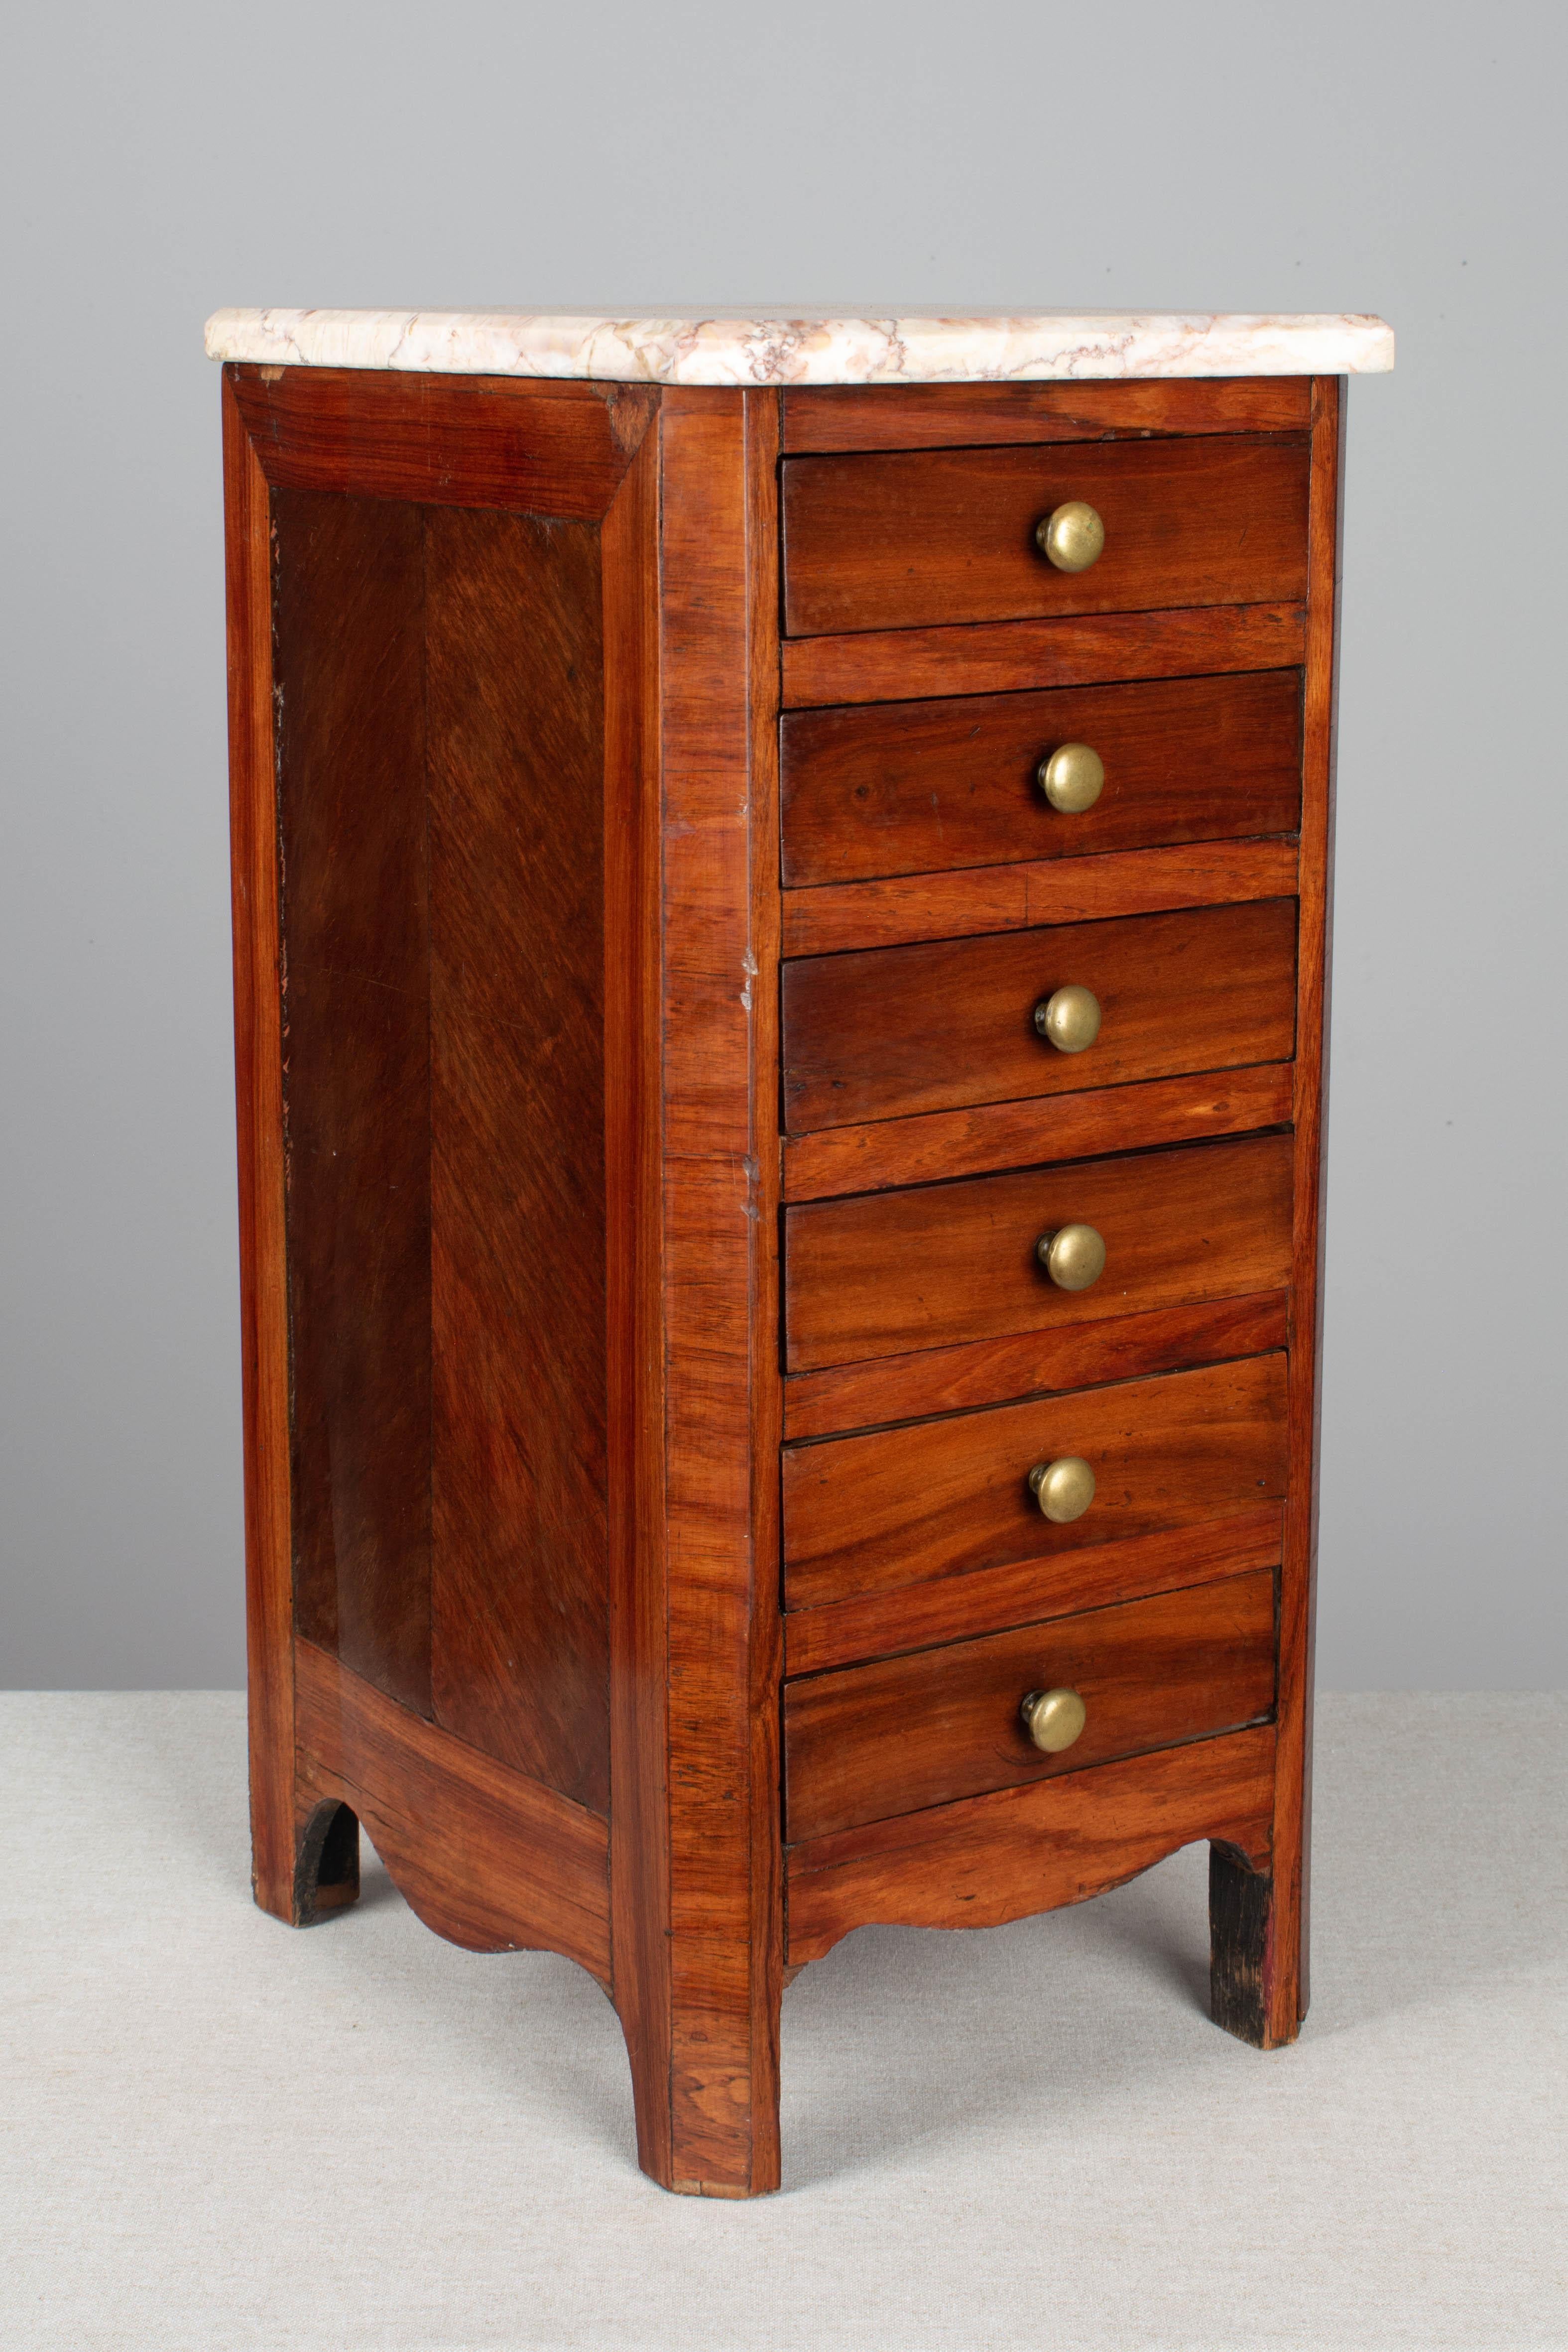 A 19th century Louis Philippe style miniature sample commode made of solid and veneer of mahogany with French polish finish. Five dovetailed drawers with brass knobs. Unusual tall, deep proportions. Replaced marble top is not attached. Minor veneer